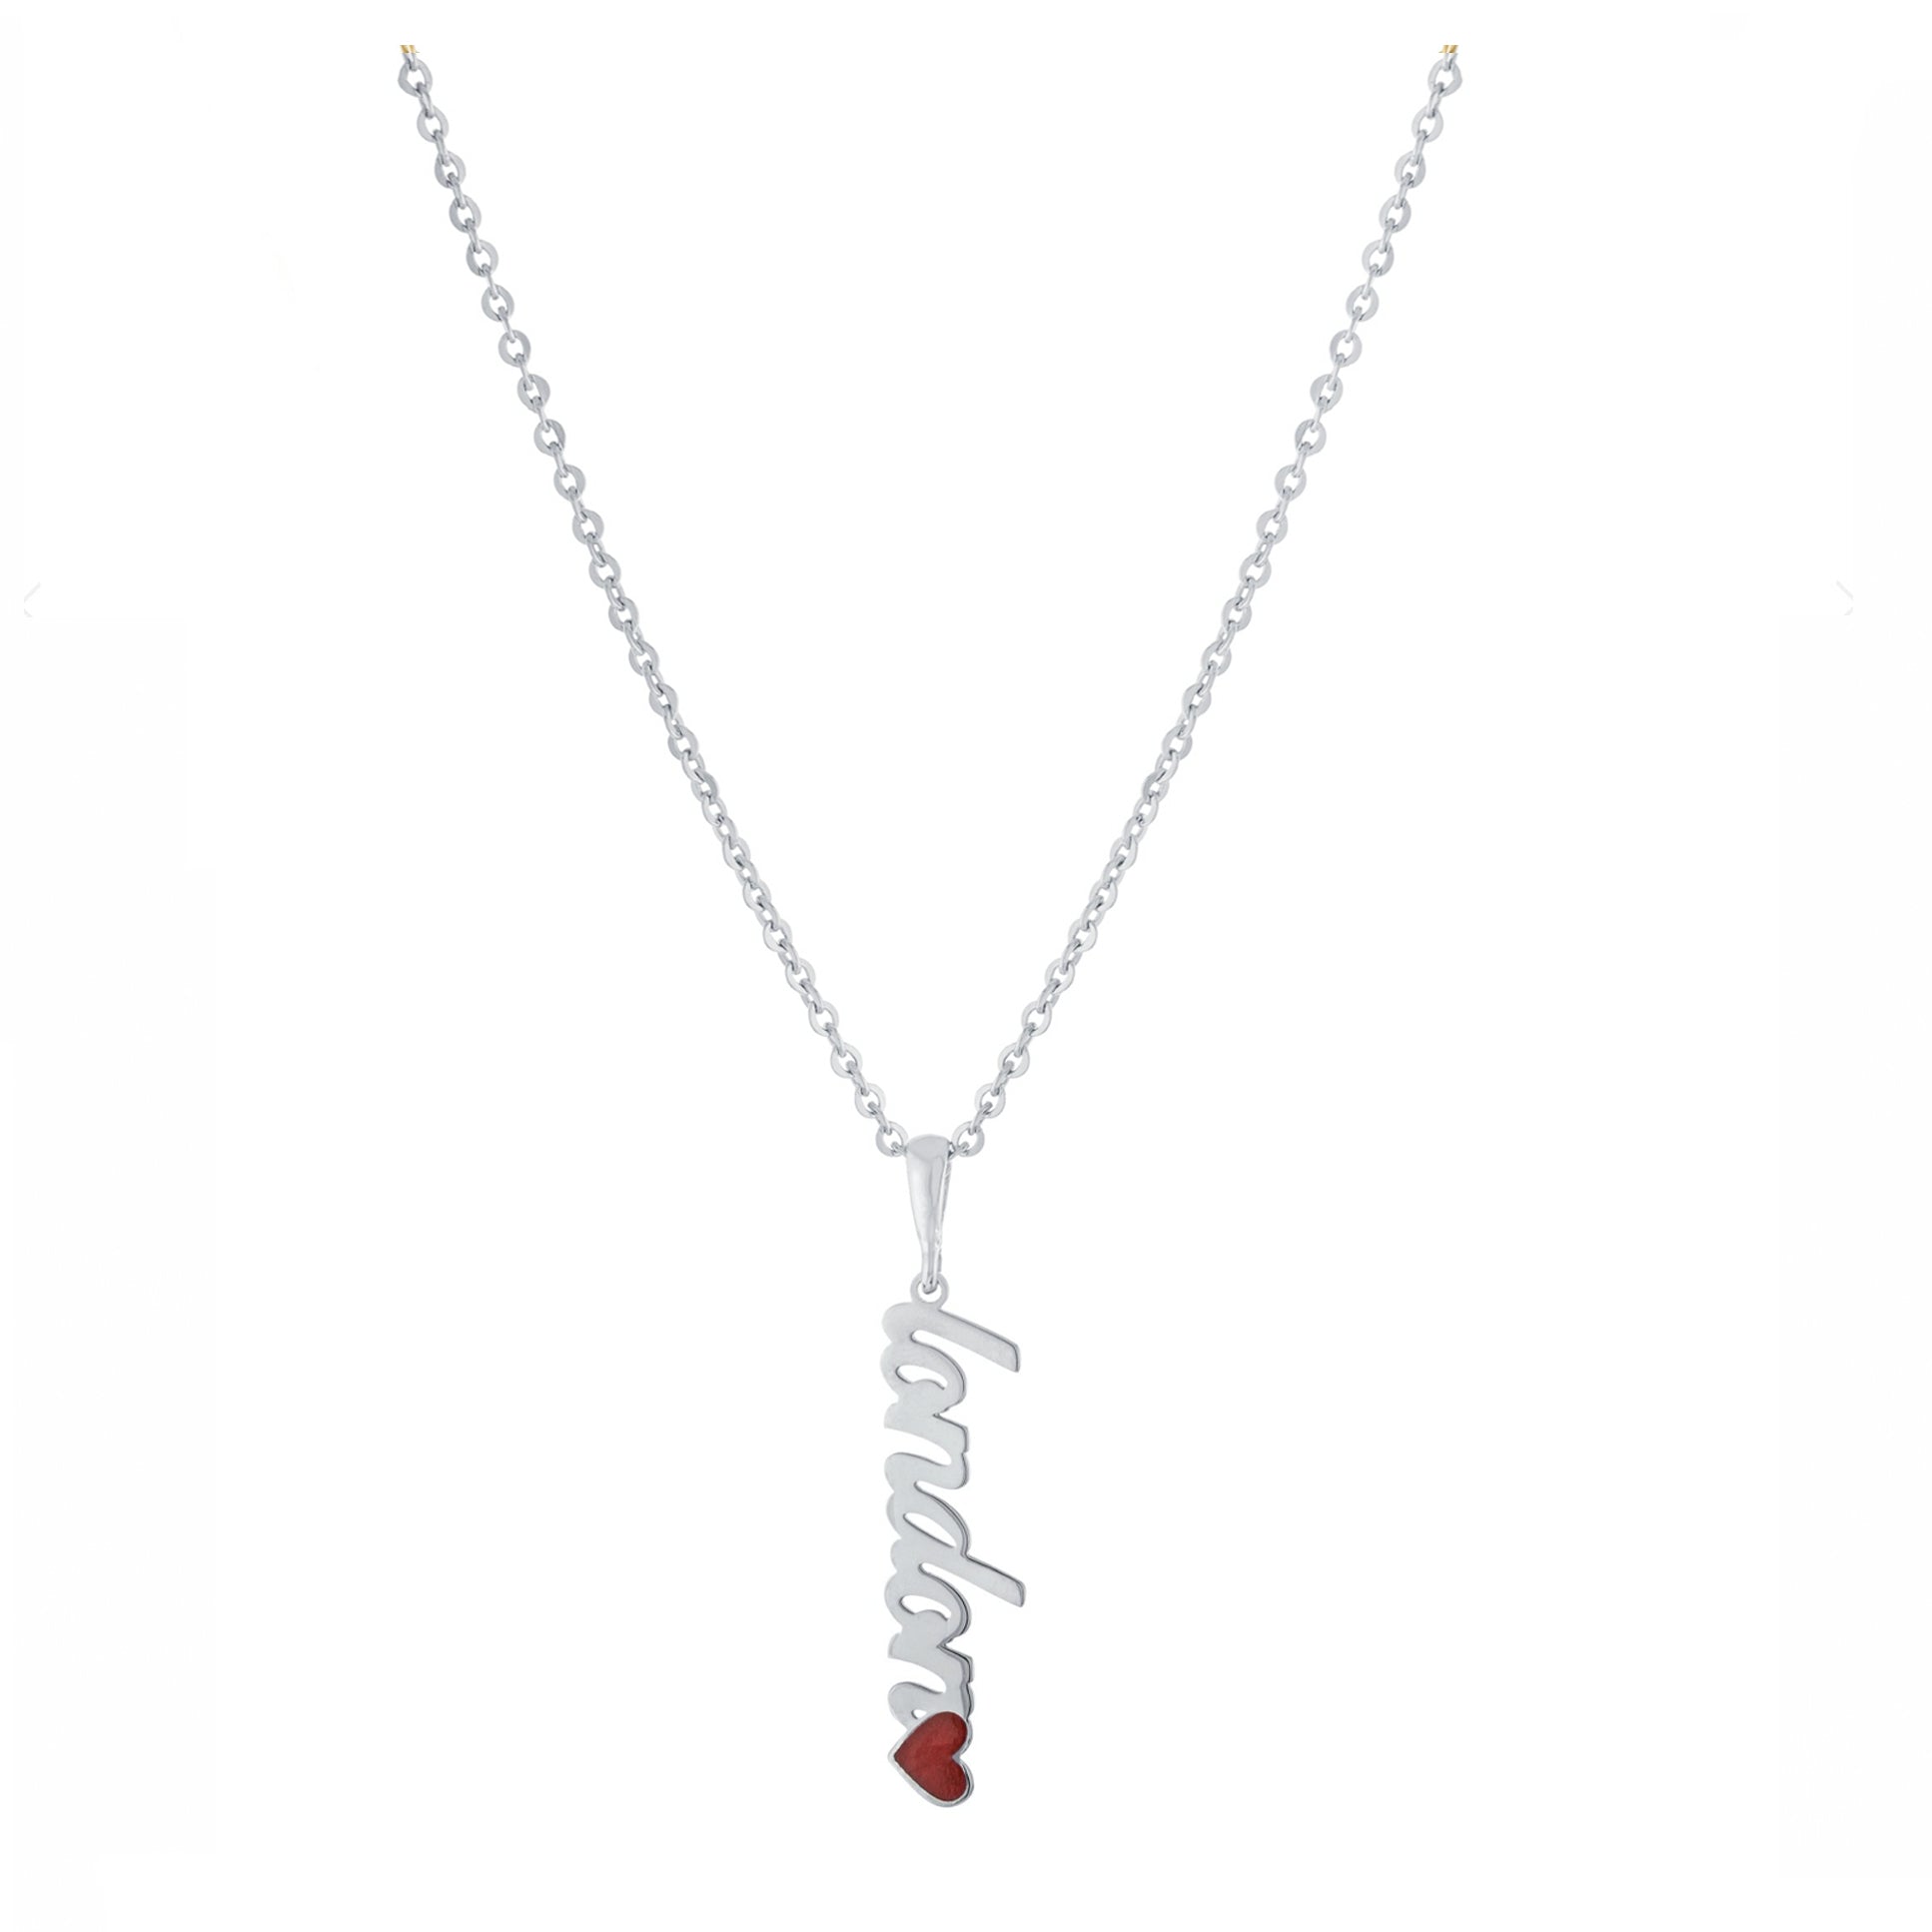 Personalized Vertical Script Name Necklace with Resin Heart